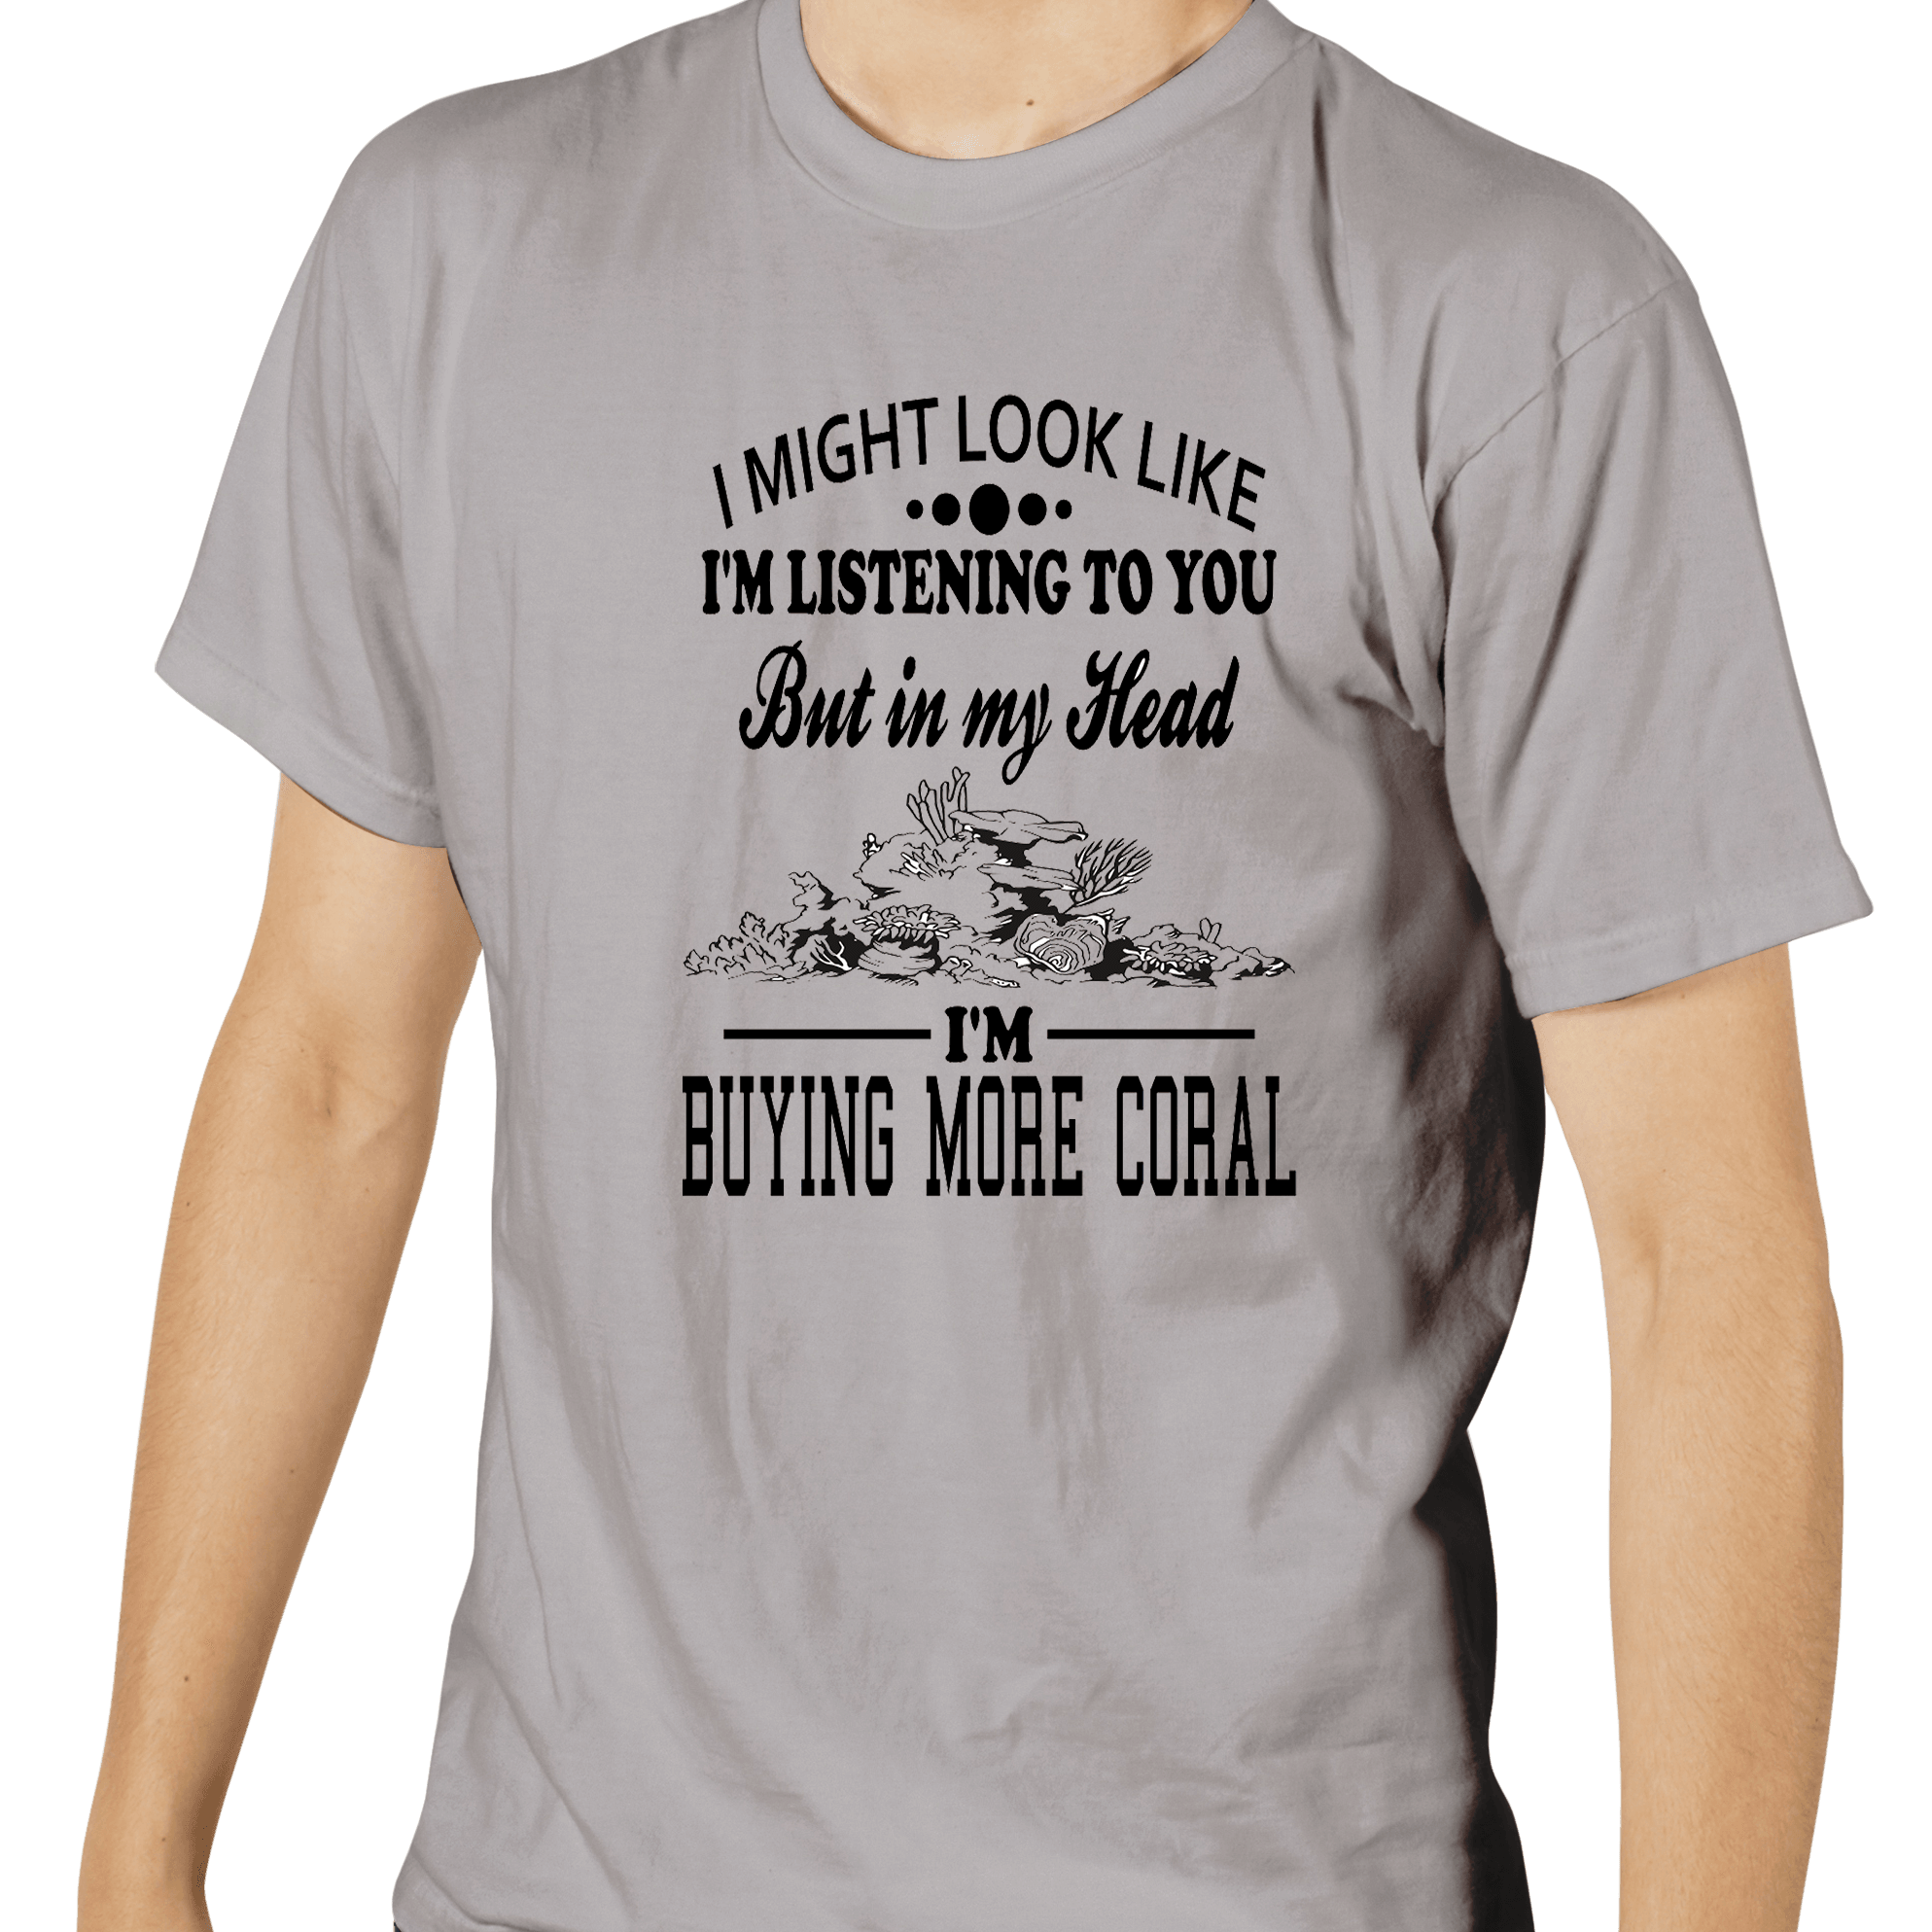 I'm Buying More Coral T-Shirt Grey - SaltCritters